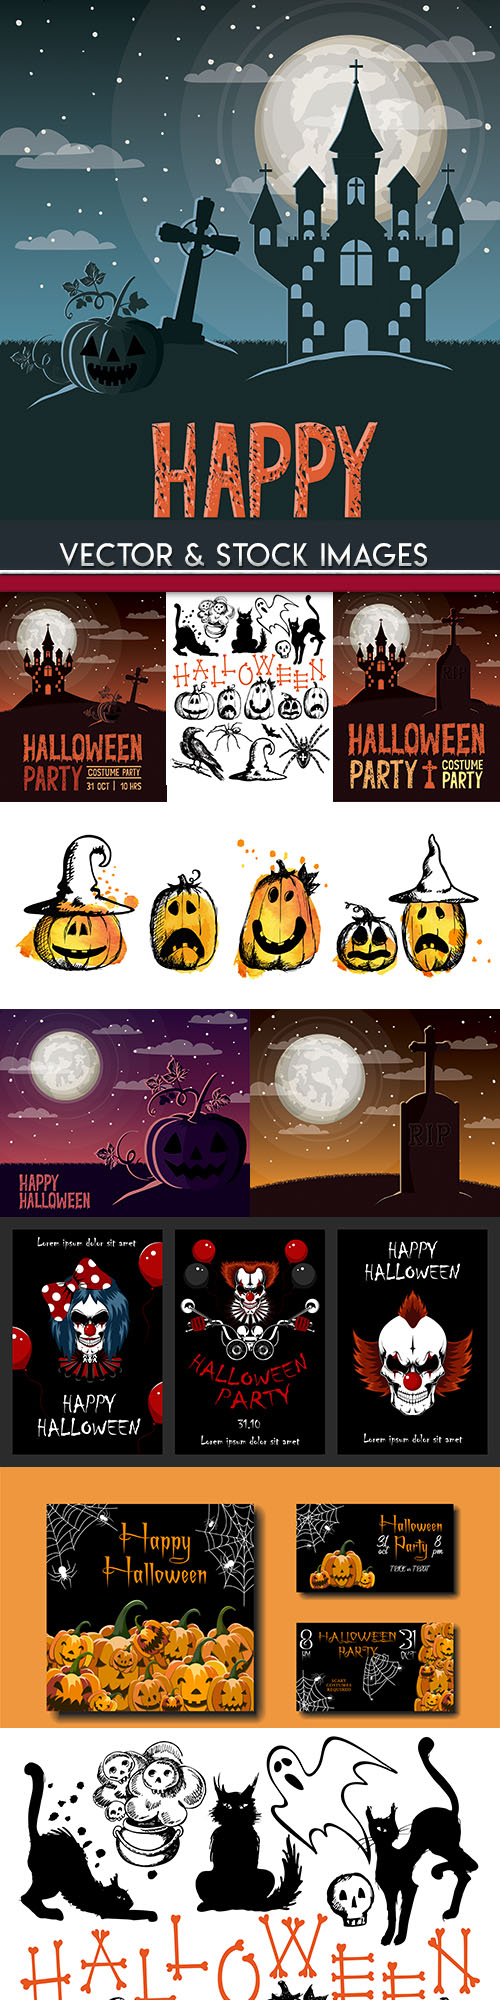 Happy Halloween holiday illustration collection 28